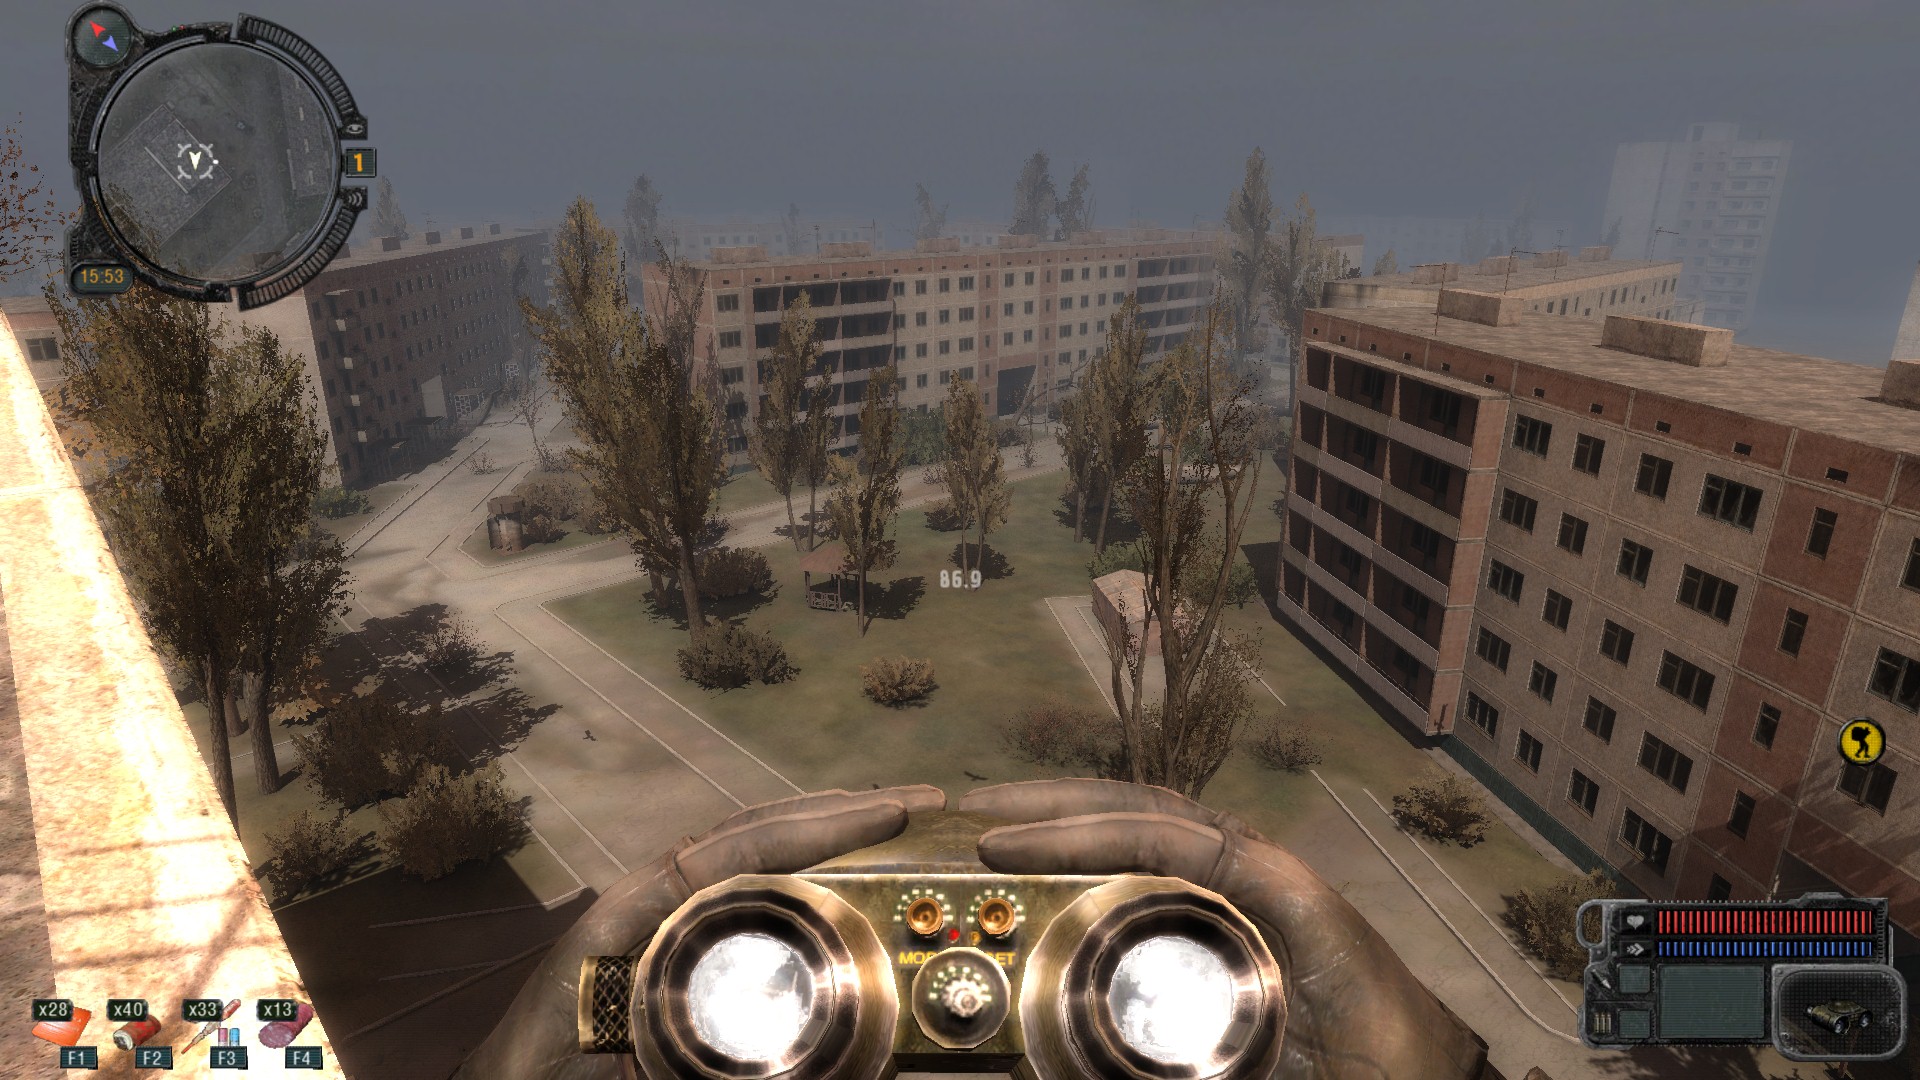 S.T.A.L.K.E.R.: Call of Pripyat Screenshots - Image #1631 | New Game Network